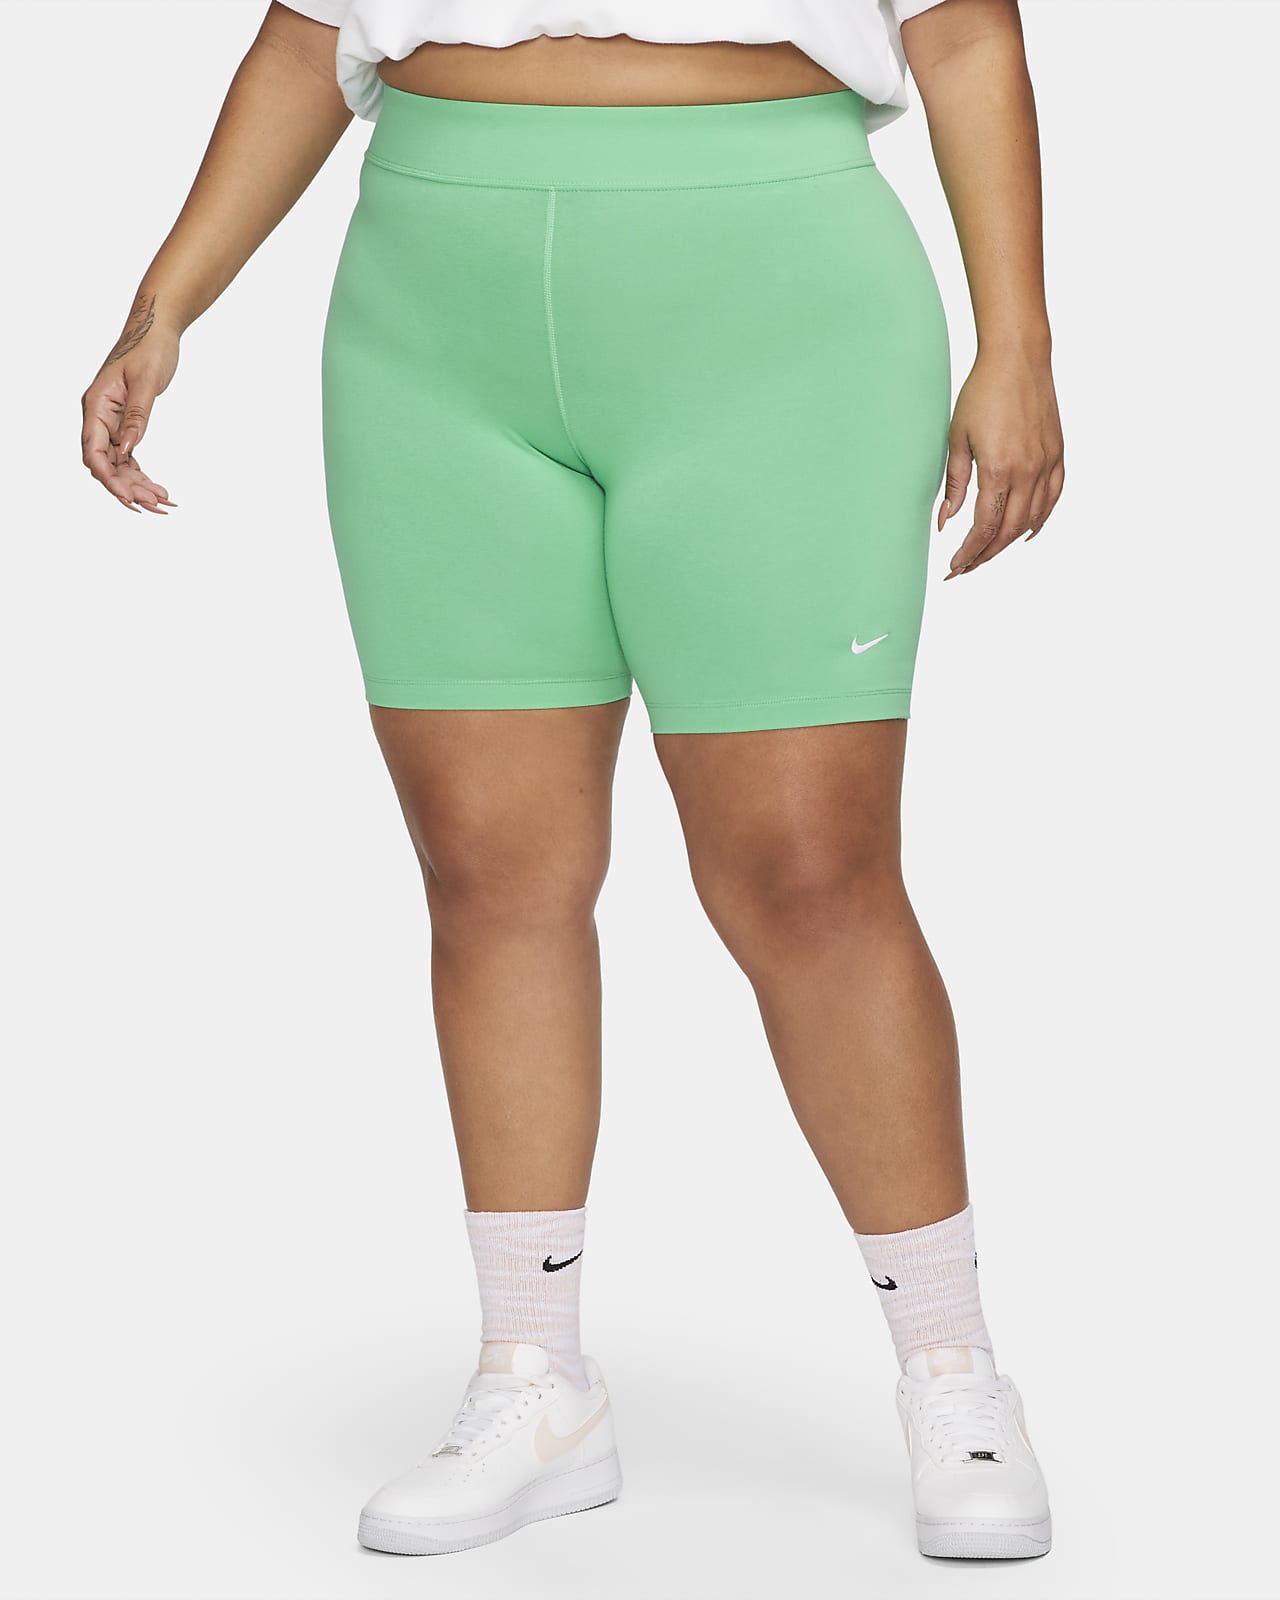 https://static.nike.com/a/images/t_PDP_1280_v1/f_auto,q_auto:eco/7a28ed28-d245-42e5-a56b-104719ca2ef6/sportswear-essential-womens-mid-rise-bike-shorts-plus-size-WSWzZ4.png